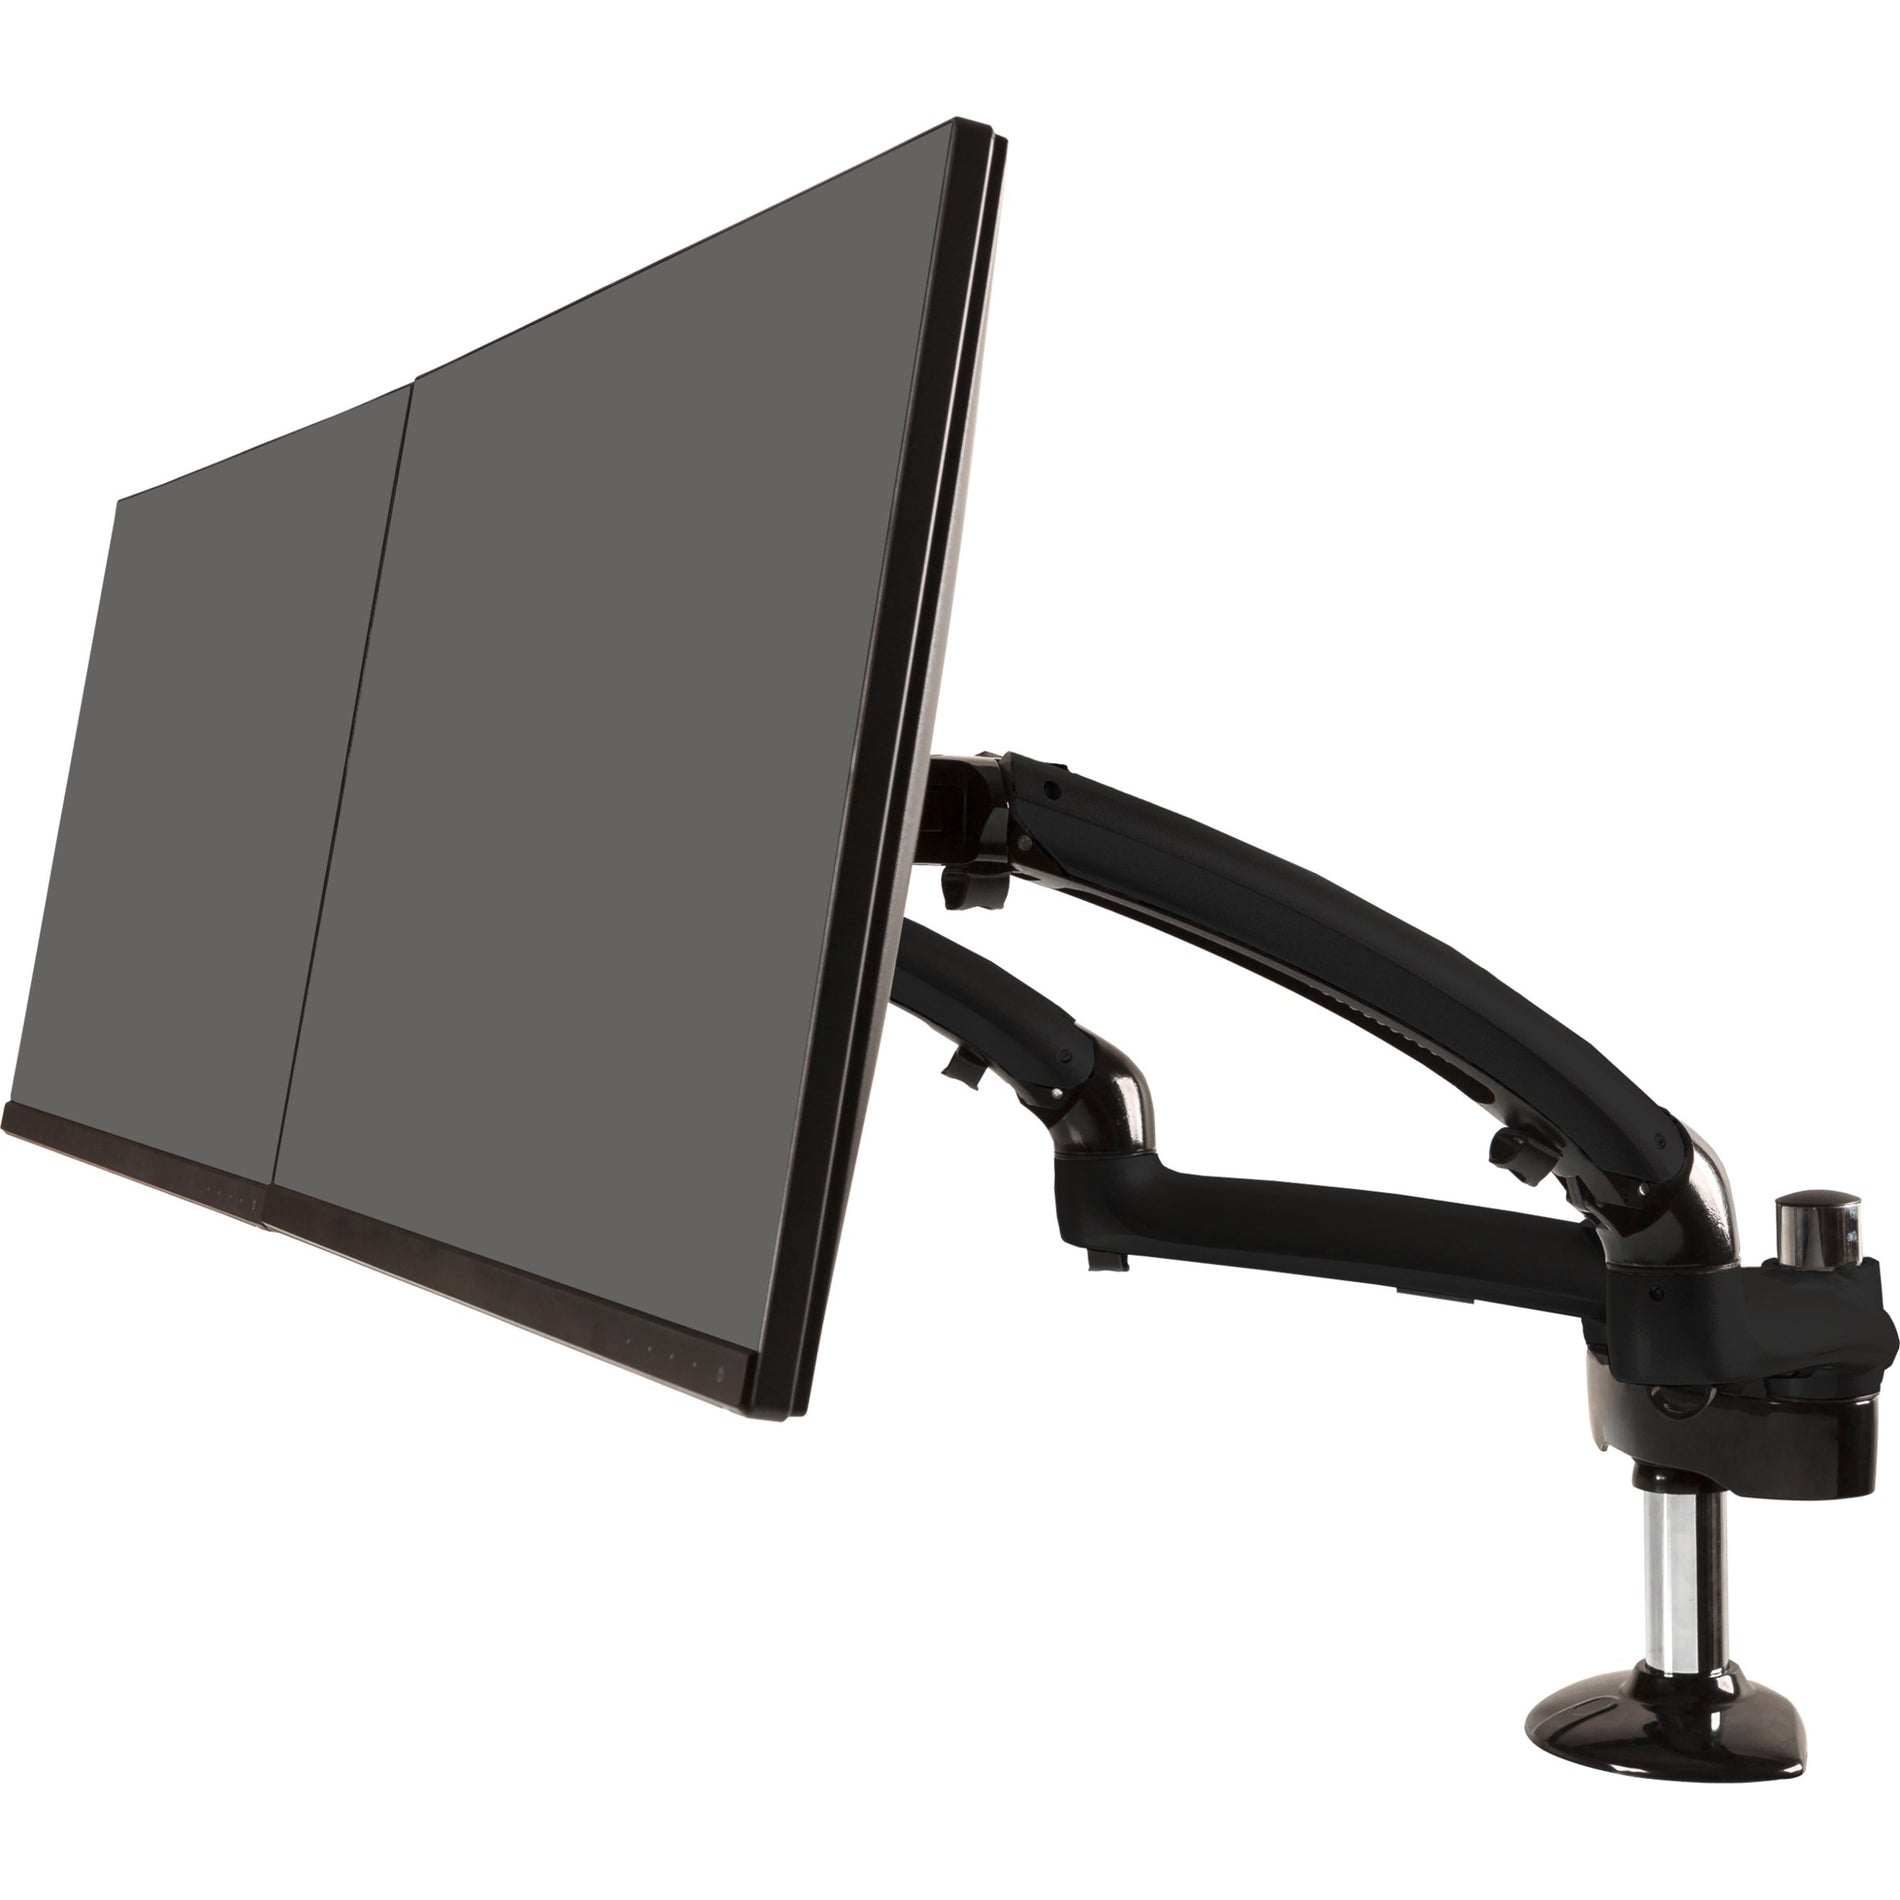 Ergotech FDM-PC-G02 Freedom Arm Dual Stylish & Functional Articulating Monitor Arm, Mounting Arm for 2 Monitors, Metal Gray, 35.60 lb Maximum Load Capacity, 27" Maximum Screen Size Supported